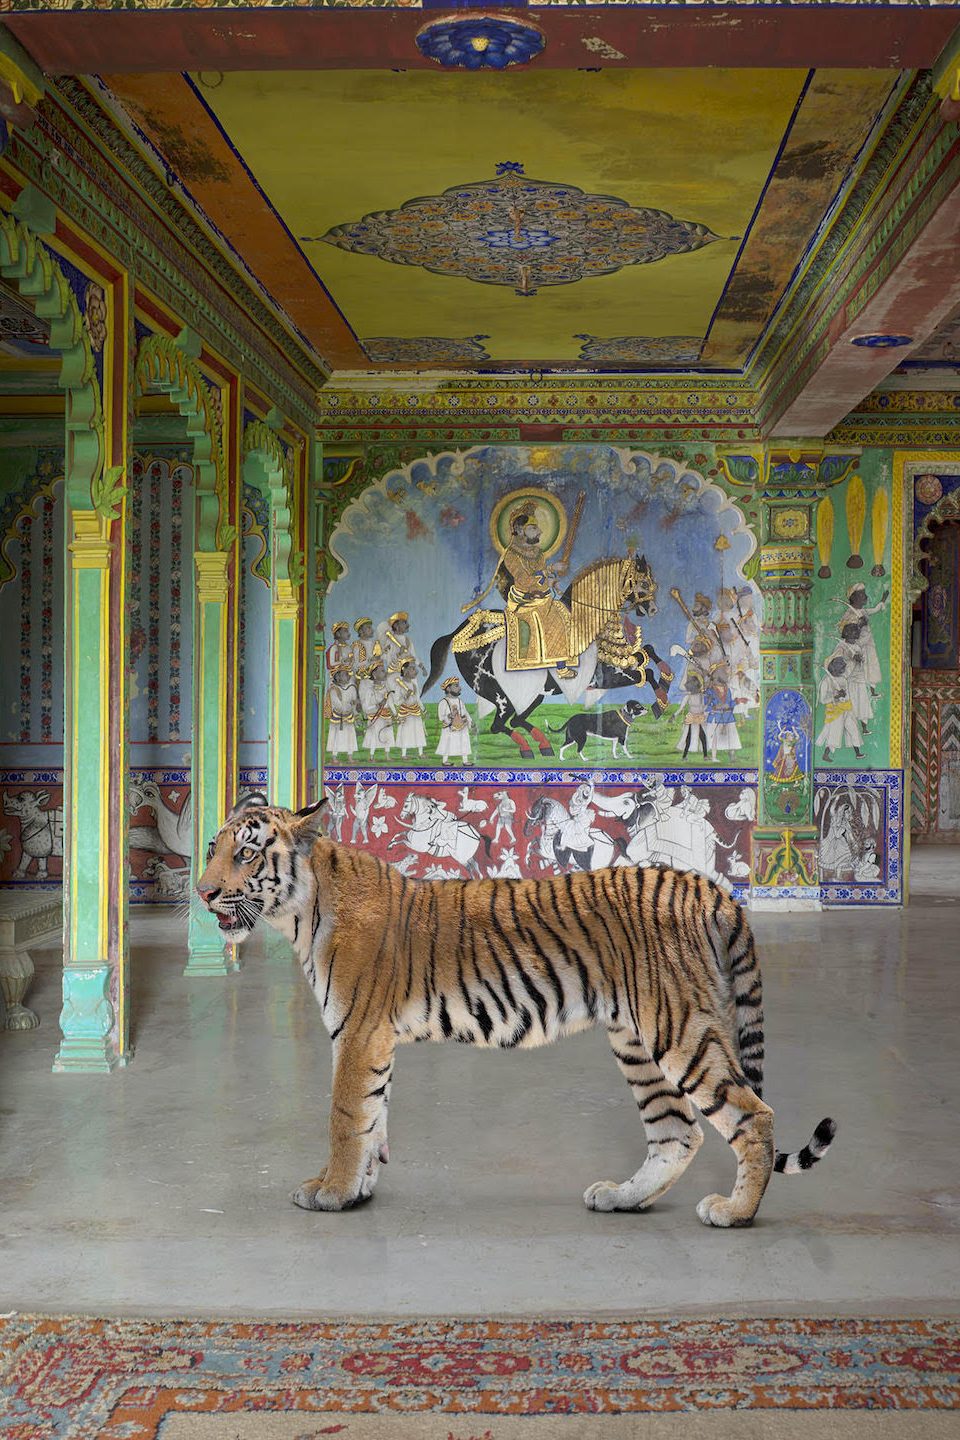 In Karen Knorr’s Sumptuous Photos, Exotic Animals Appear in Opulent Palaces